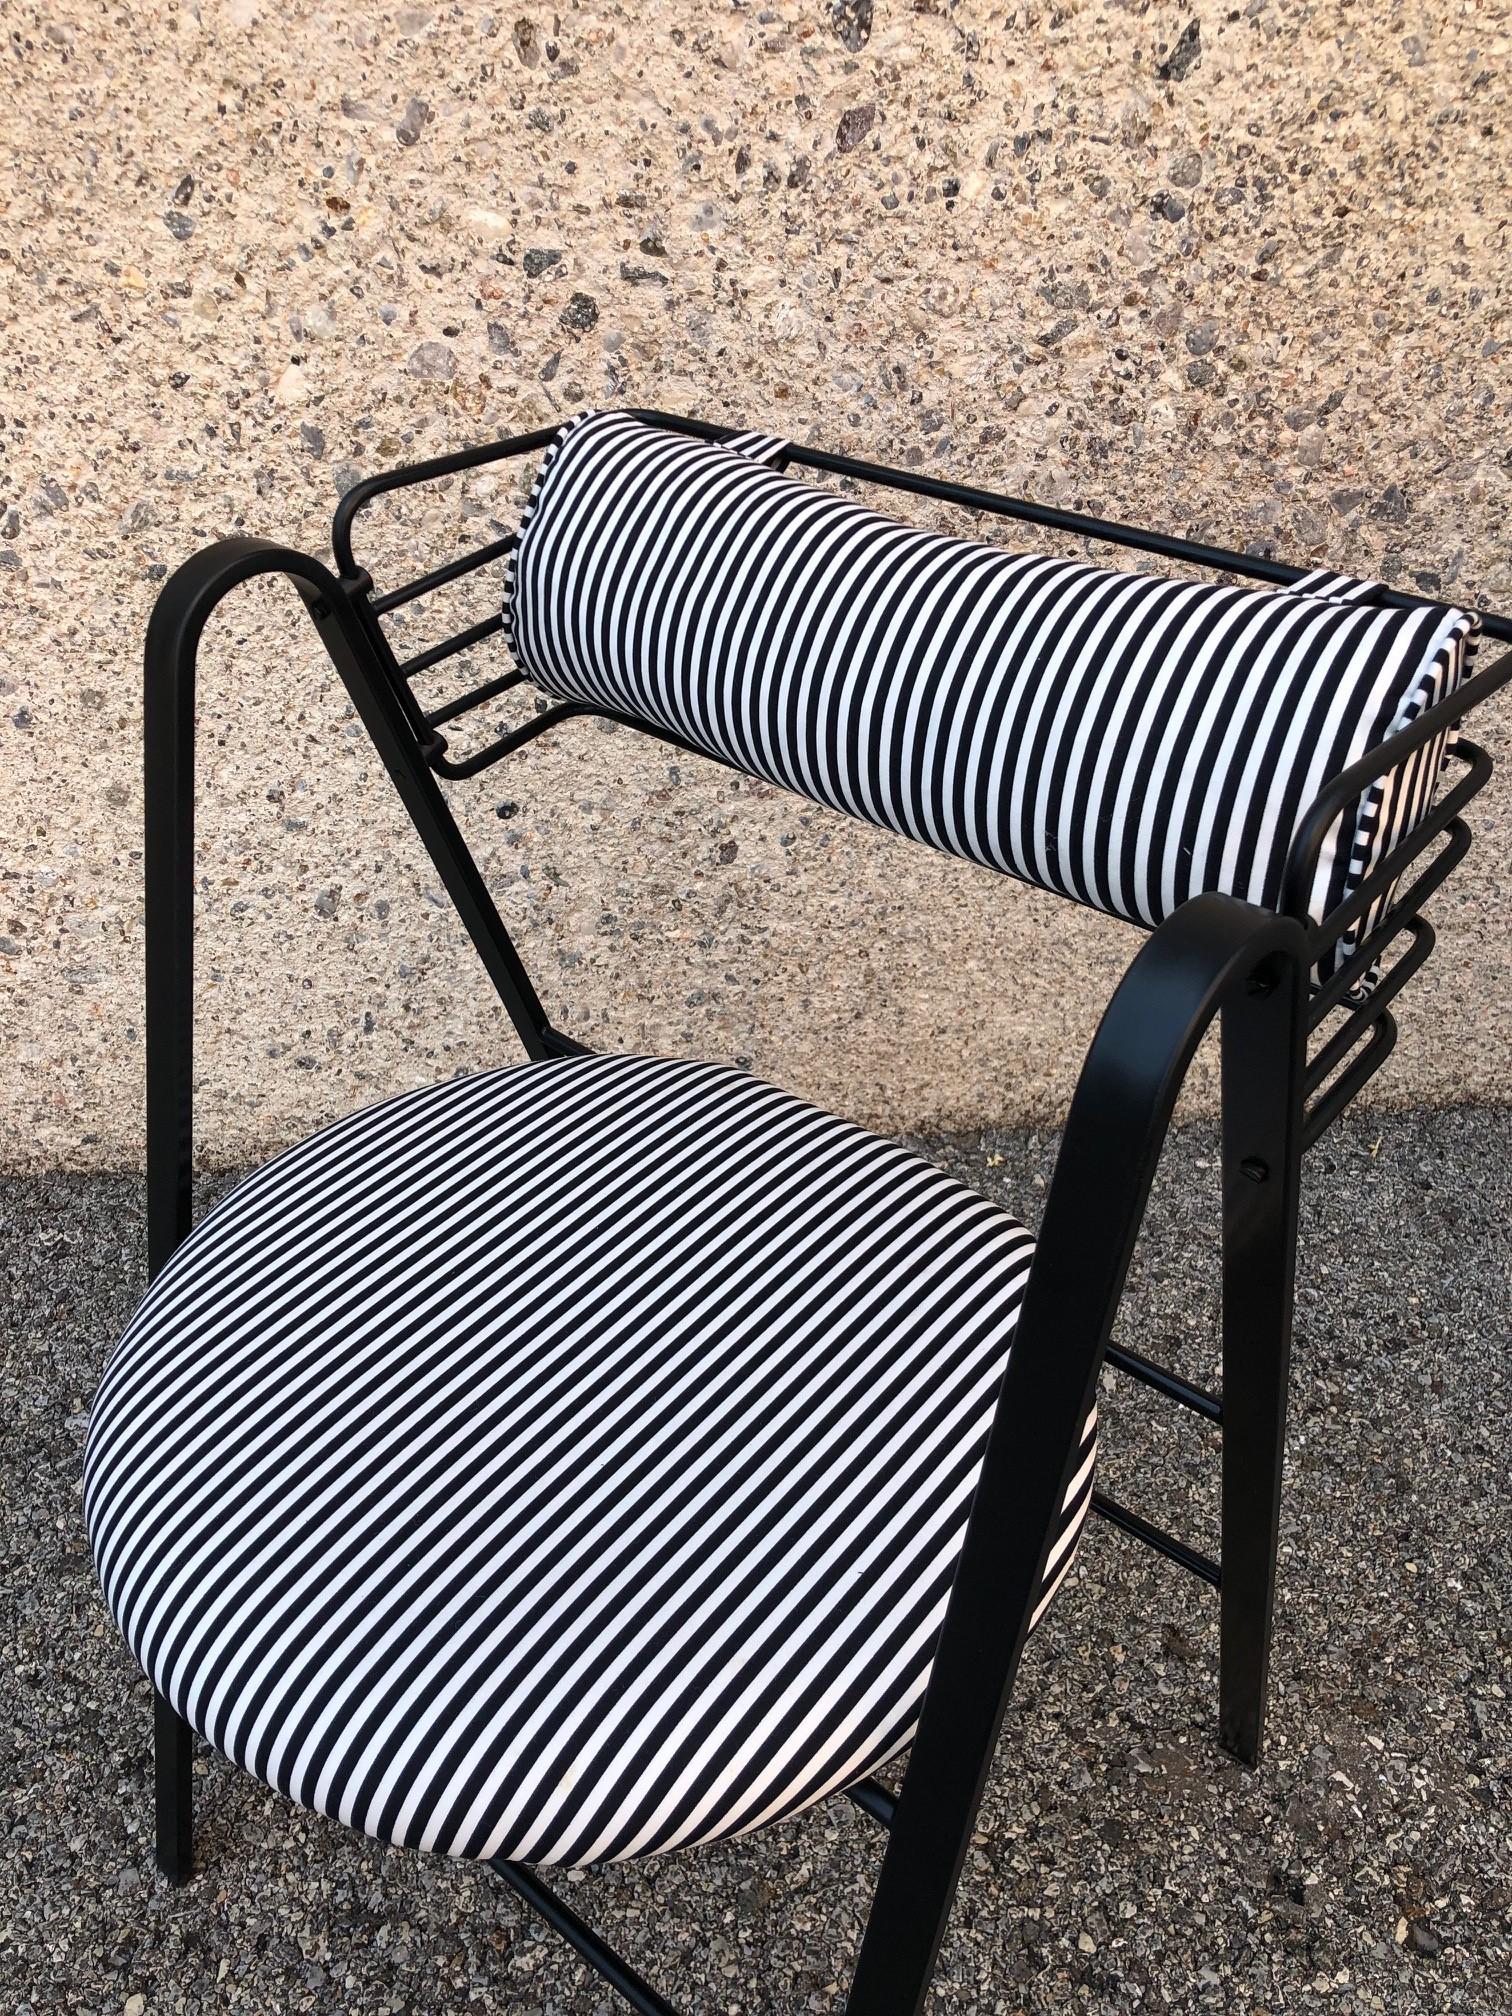 Late 20th Century Mario Botta Set of 4 Chairs, Made in Italy, 1990s Metal